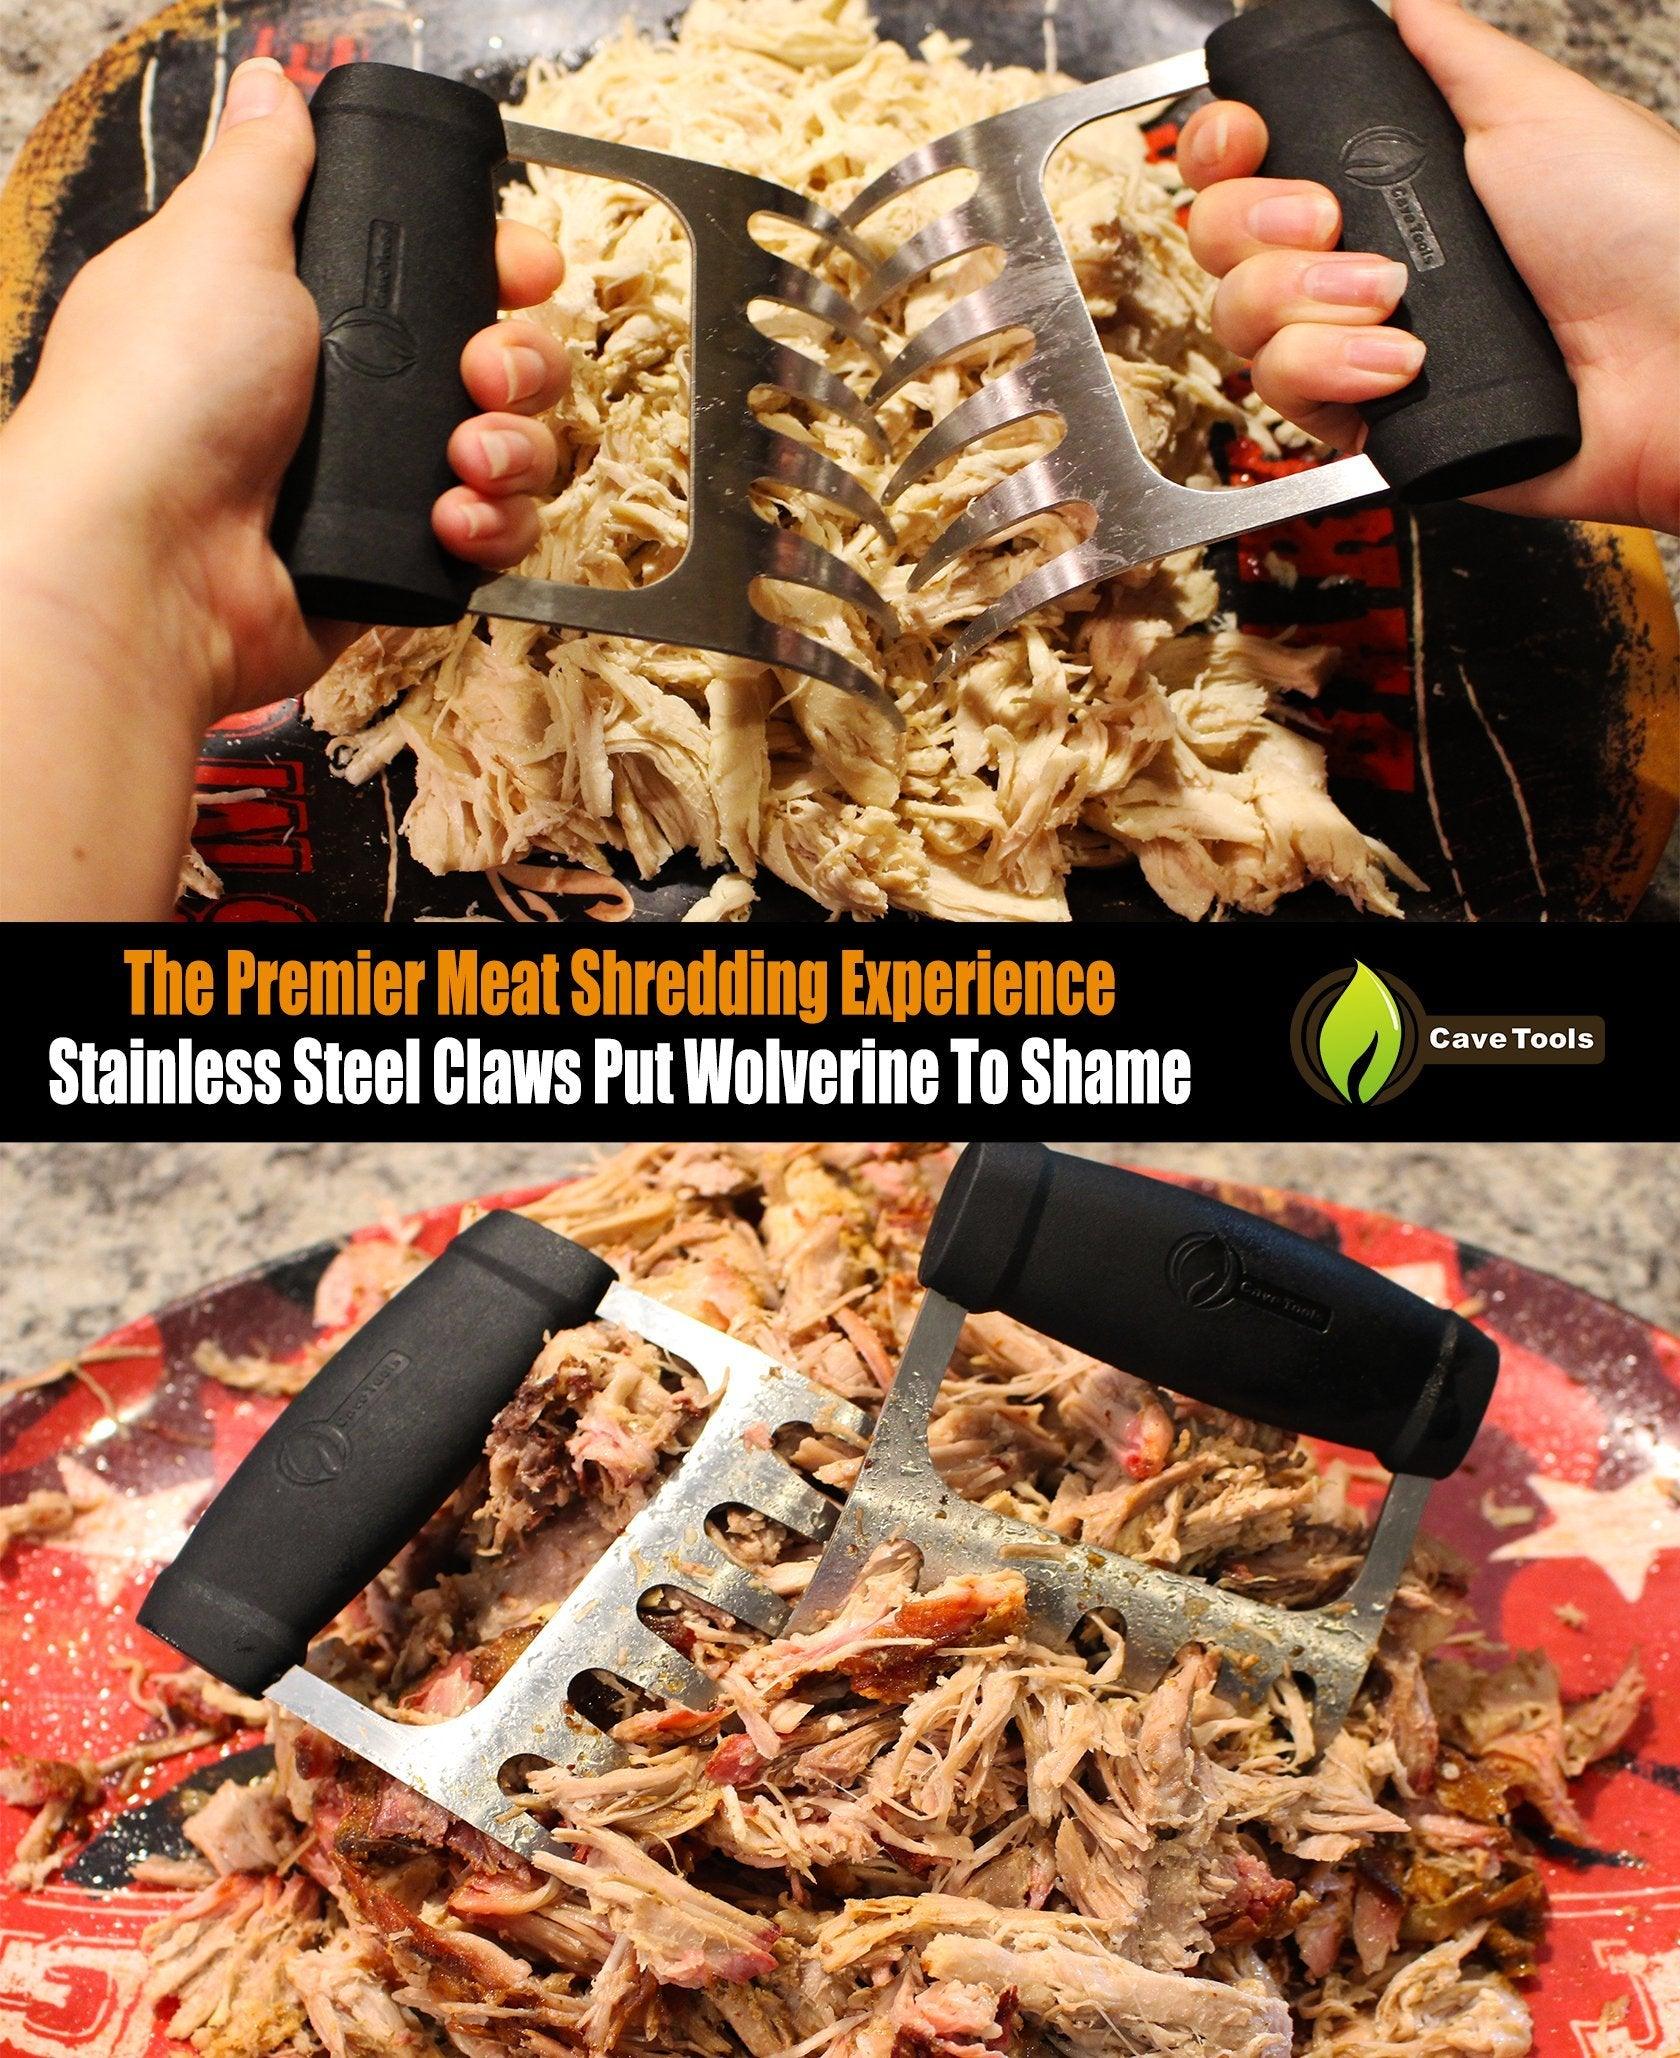 Cave Tools Metal Meat Claws for Shredding Pulled Pork, Chicken, Turkey, and Beef- Handling & Carving Food - Barbecue Grill Accessories for Smoker, or Slow Cooker - Knuckle Grip - CookCave